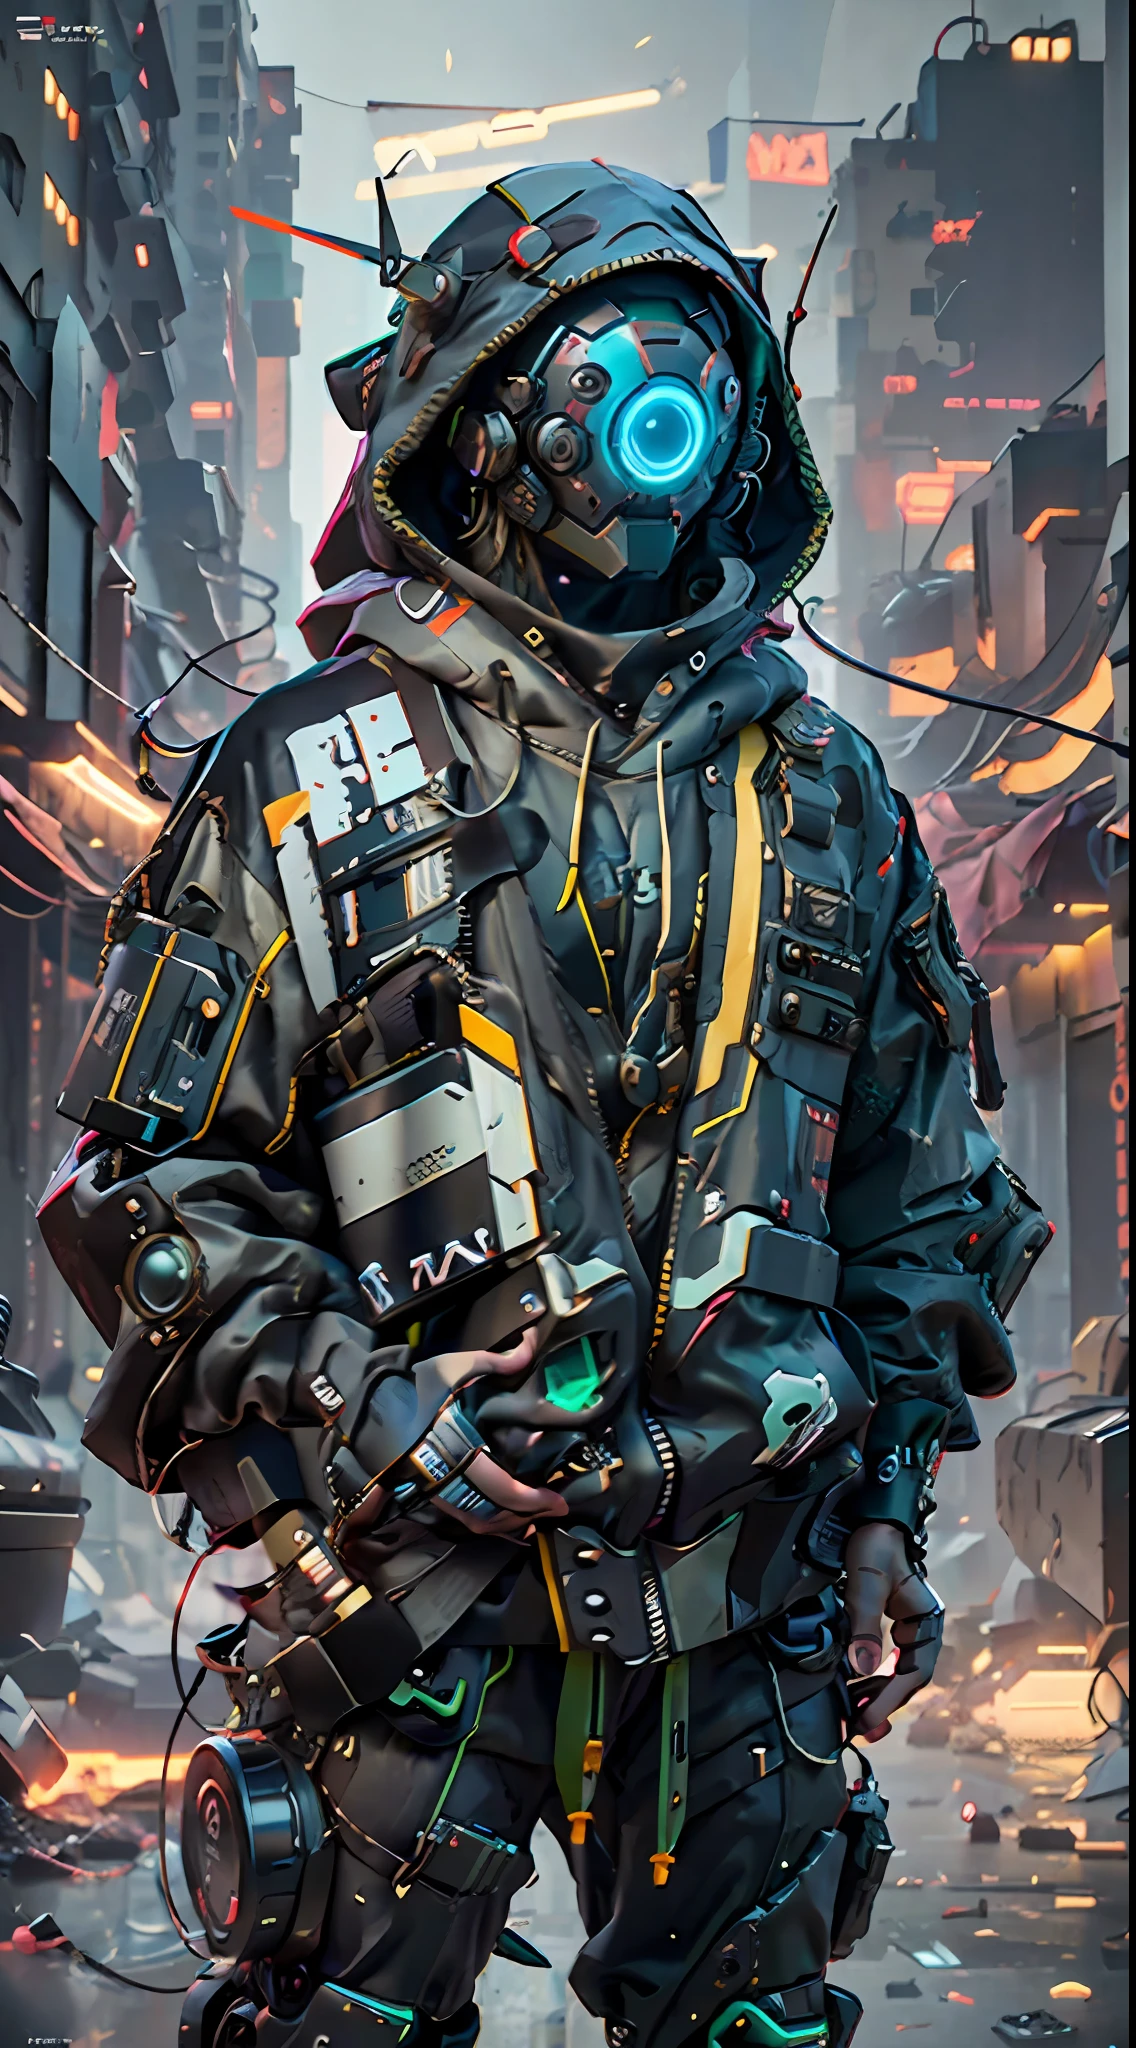 A realistic DSLR photo of a cowboy mecha, wearing a black and green suit with a backpack. The suit is a mix of Cyberpunk asymmetrical Streetwear and oversized Cyberpunk style. The character is in a dangerous, ghetto-like street environment. He is a futuristic cyberpunk soldier or mercenary, with advanced technology including robotic arms and a cyber helmet with a HUD display. The clothing is all black and baggy, with the hood of the hoodie over the cyber helmet. The scene is lit with cinematic lighting and has a futuristic, intimidating feel. The image is rendered in Octane, at 4k resolution, with Maya and Substance used in the creation process.